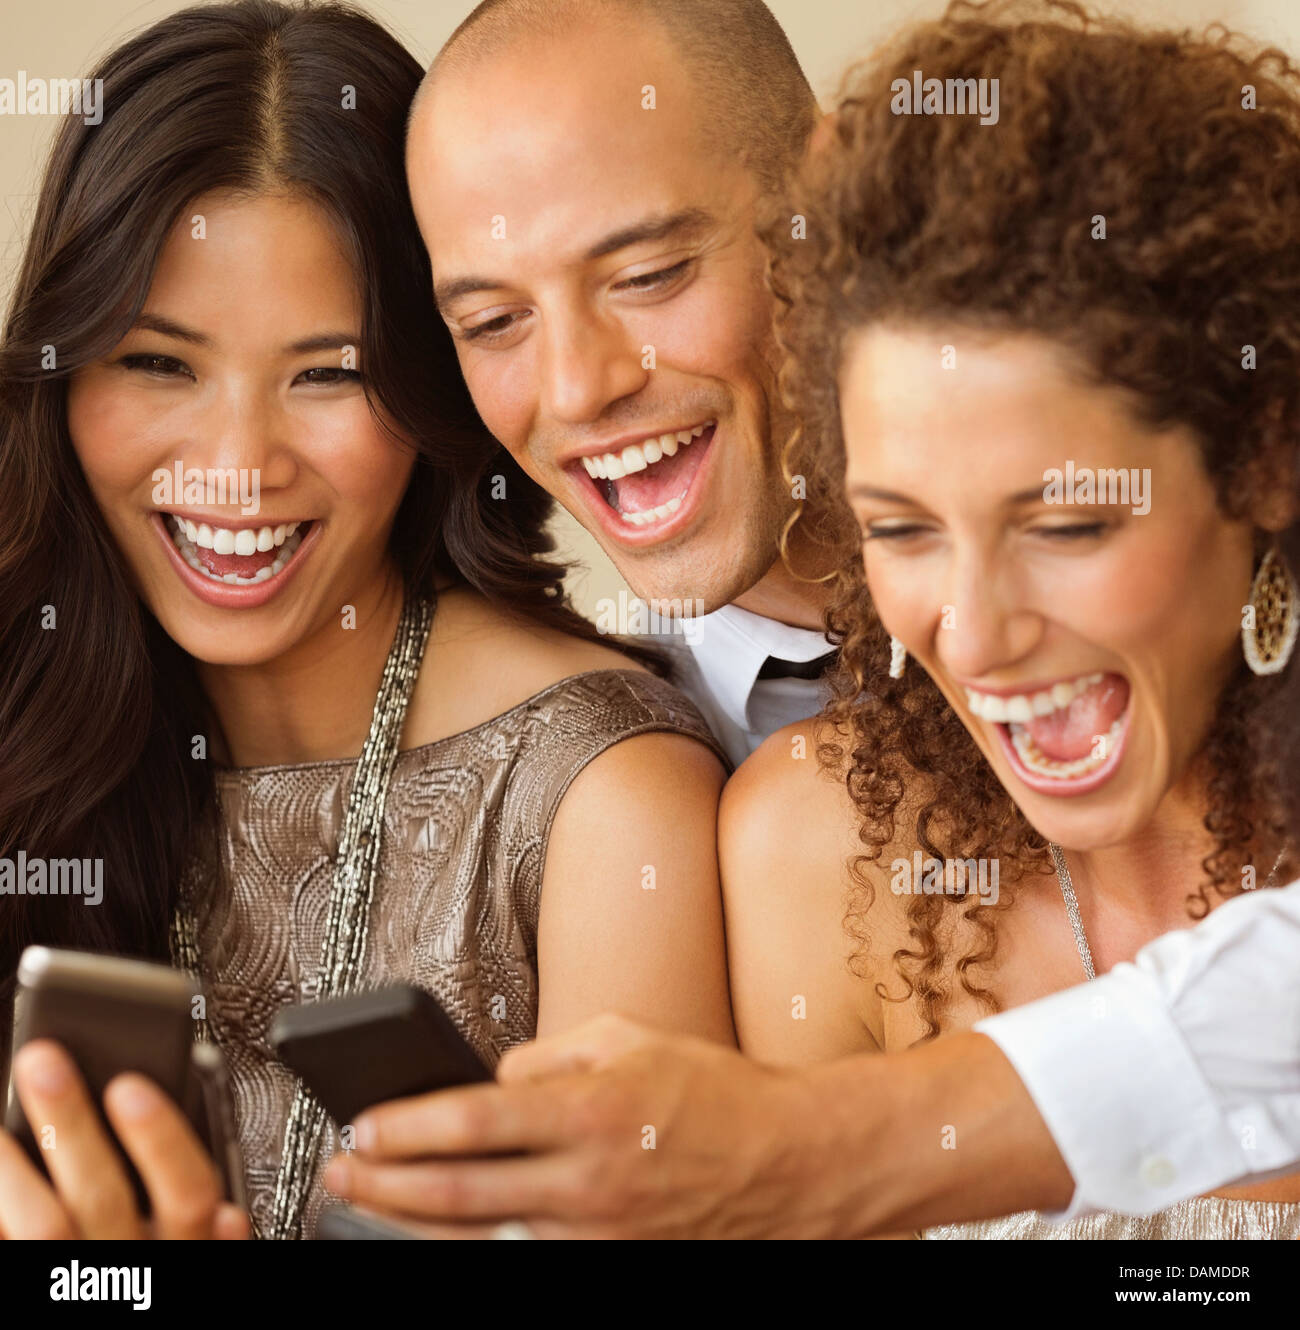 Friends using cell phones together Stock Photo